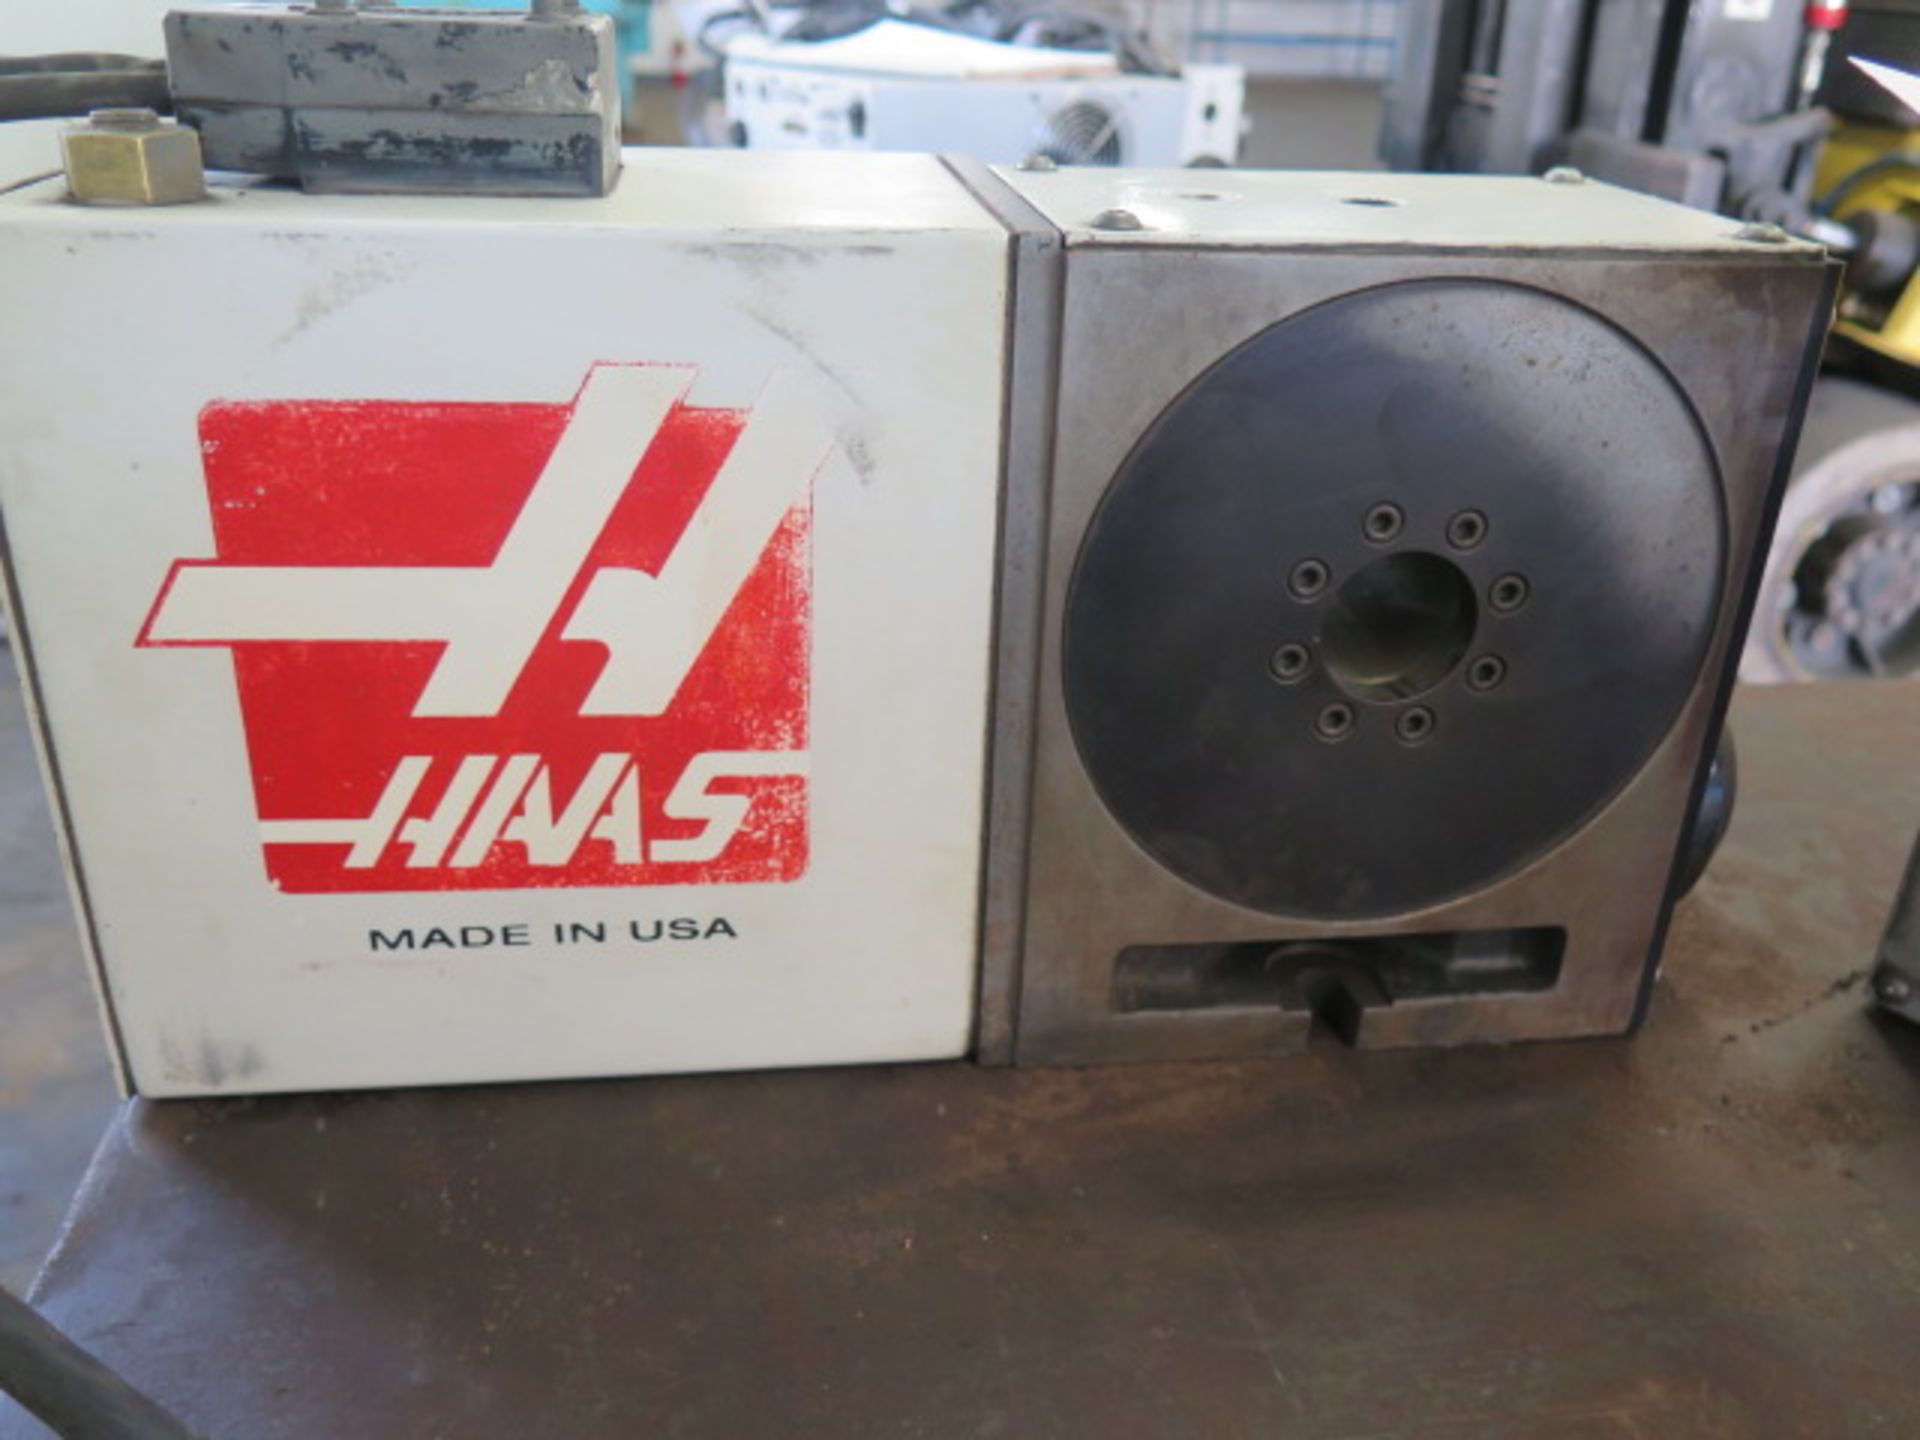 Haas HRT160H 6” 4th Axis Rotary Indexer s/n 163732 - Image 4 of 8